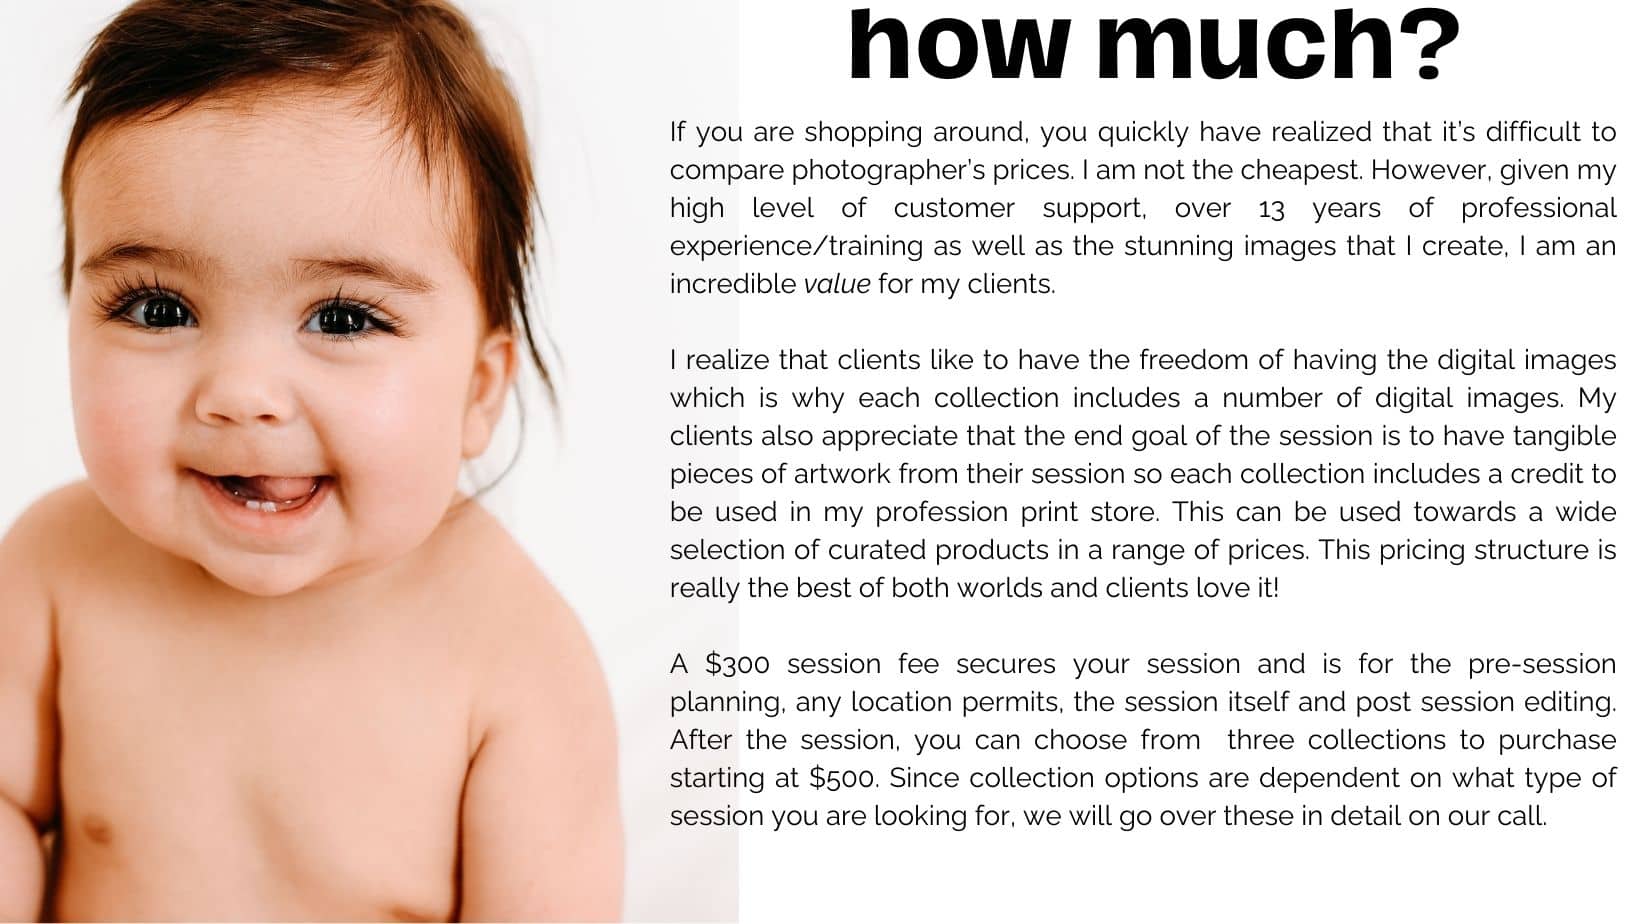 a happy baby is smiling at the camera. text outlines pricing info